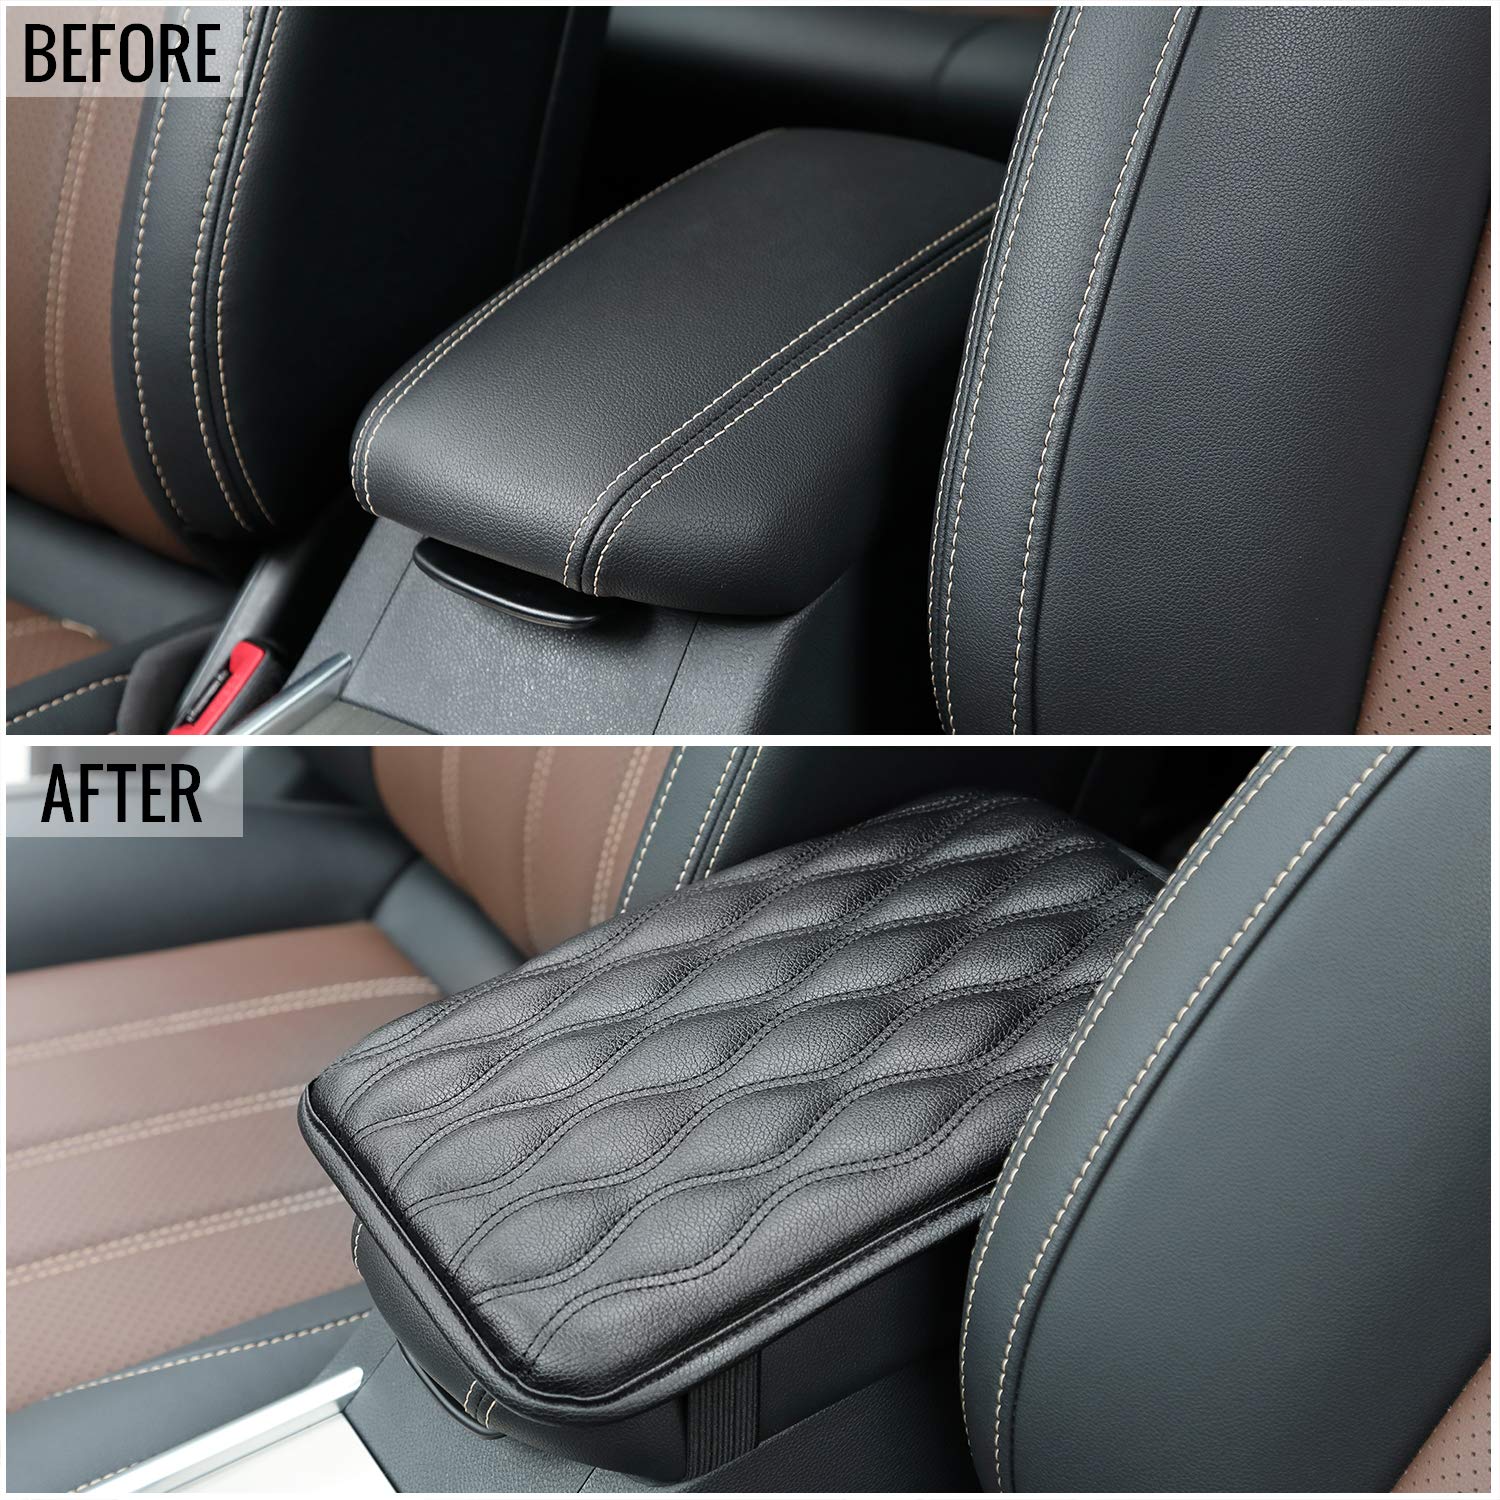 Peroptimist Universal Center Console Cover for Most Vehicle, SUV, Truck, Car, Waterproof Armrest Cover Center Console Pad, Car Armrest Seat Box Cover Protector, Enhances Your Armest Somfort - image 2 of 8